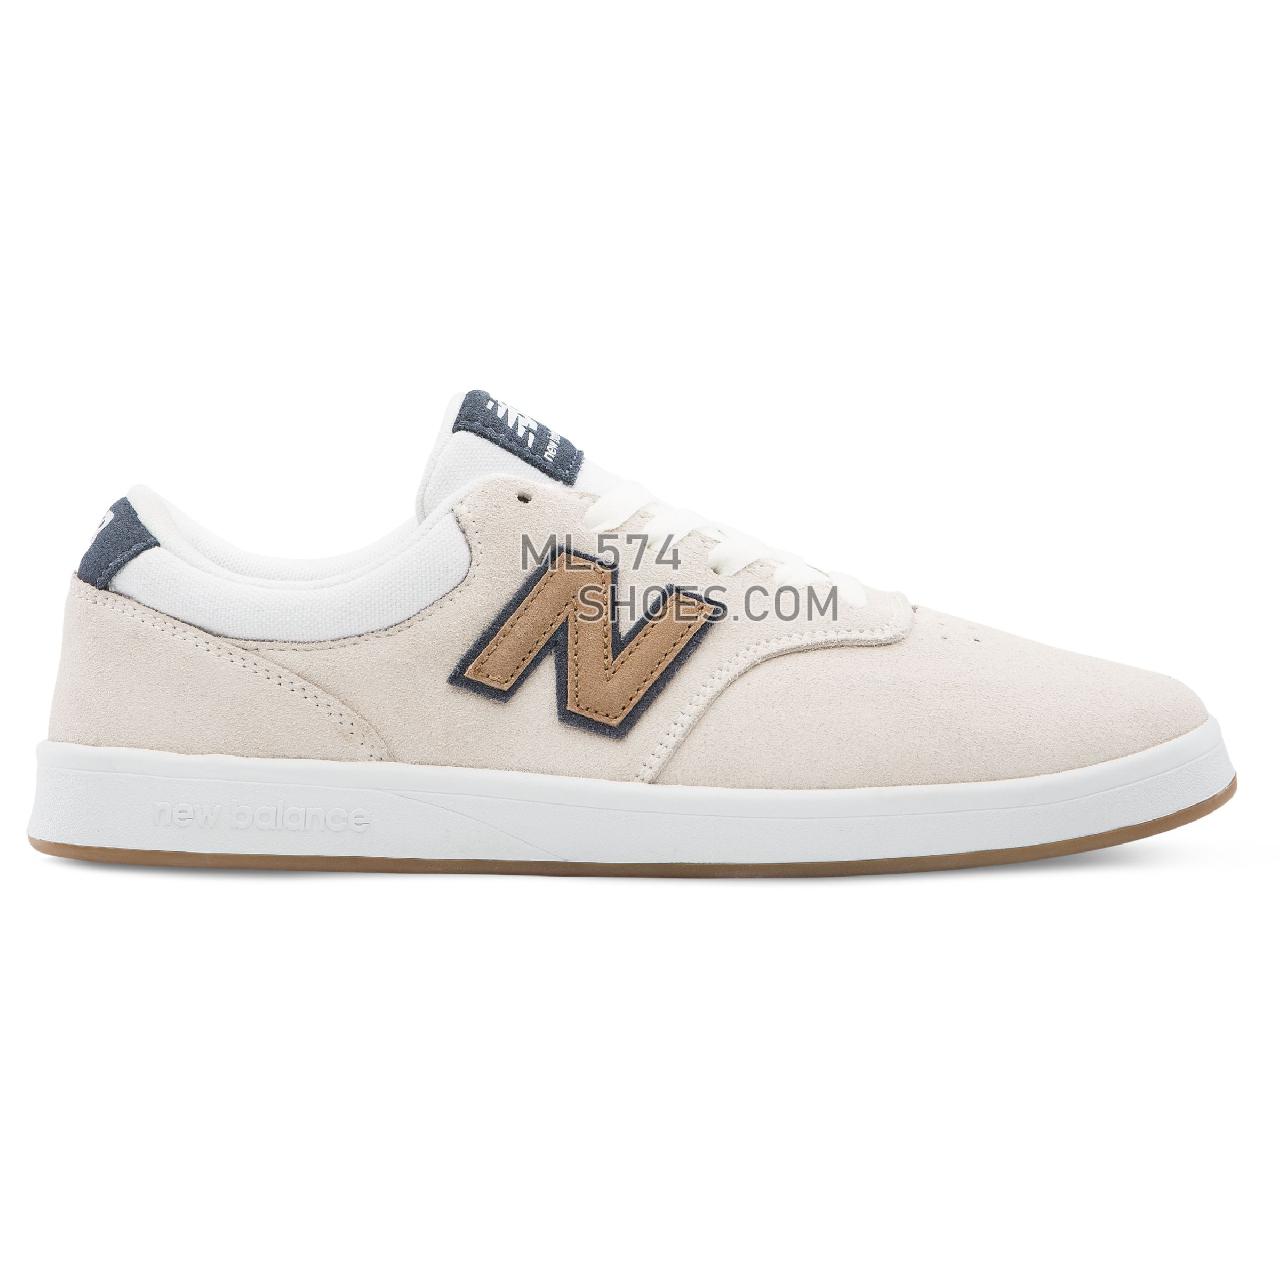 New Balance 424 - Men's 424 - Classic Sea Salt with Camel and Navy - AM424USC